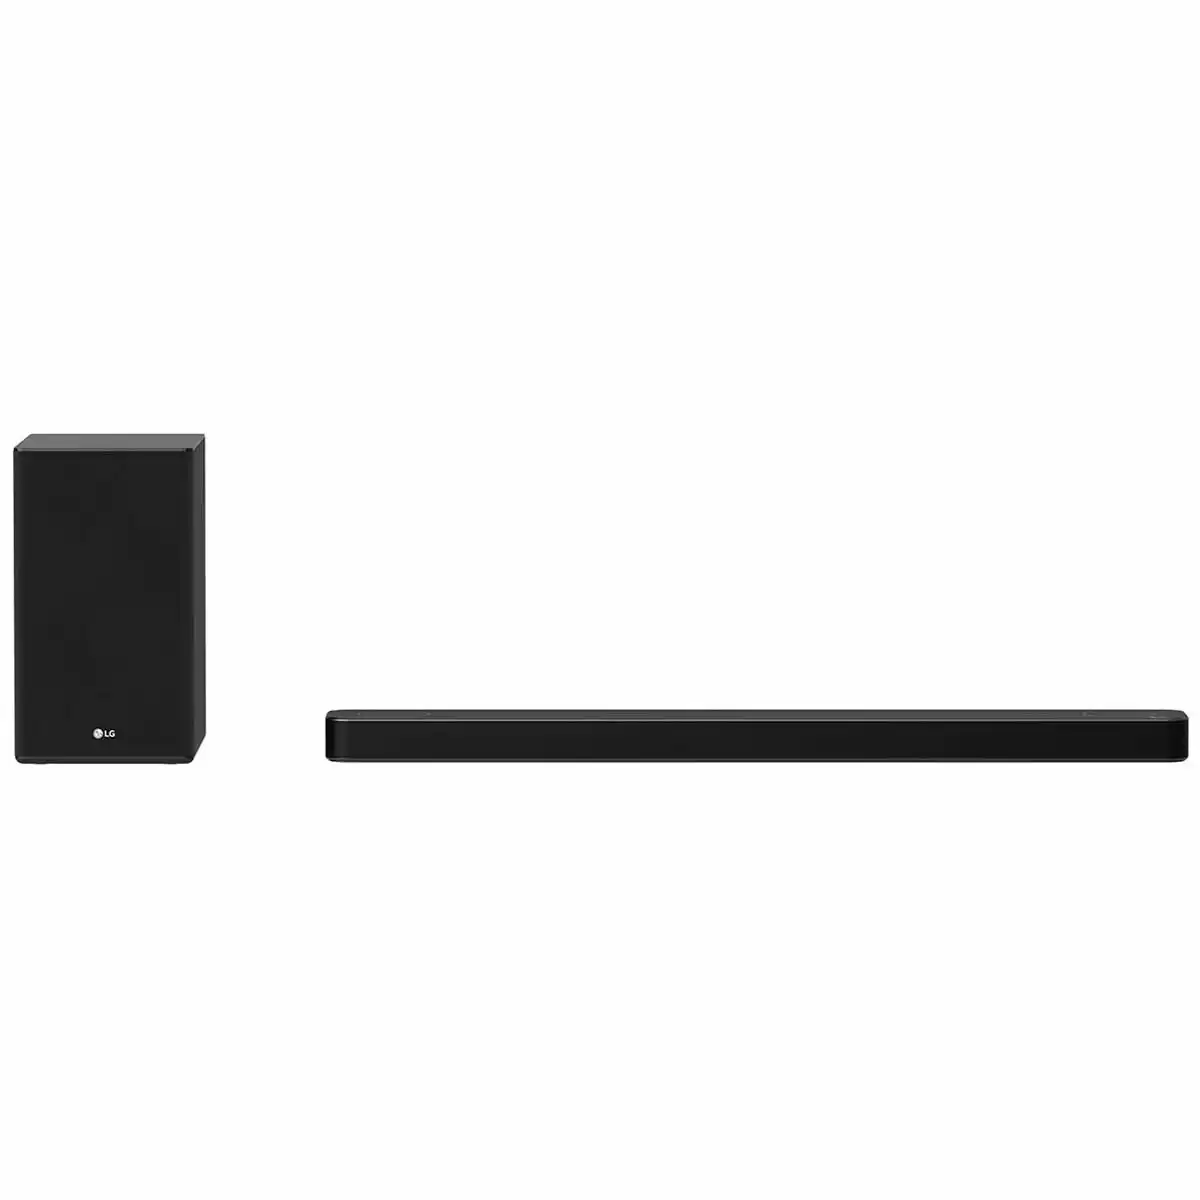 LG 3.1.2 Ch Atmos Soundbar with Meridian Sound and Wireless Subwoofer